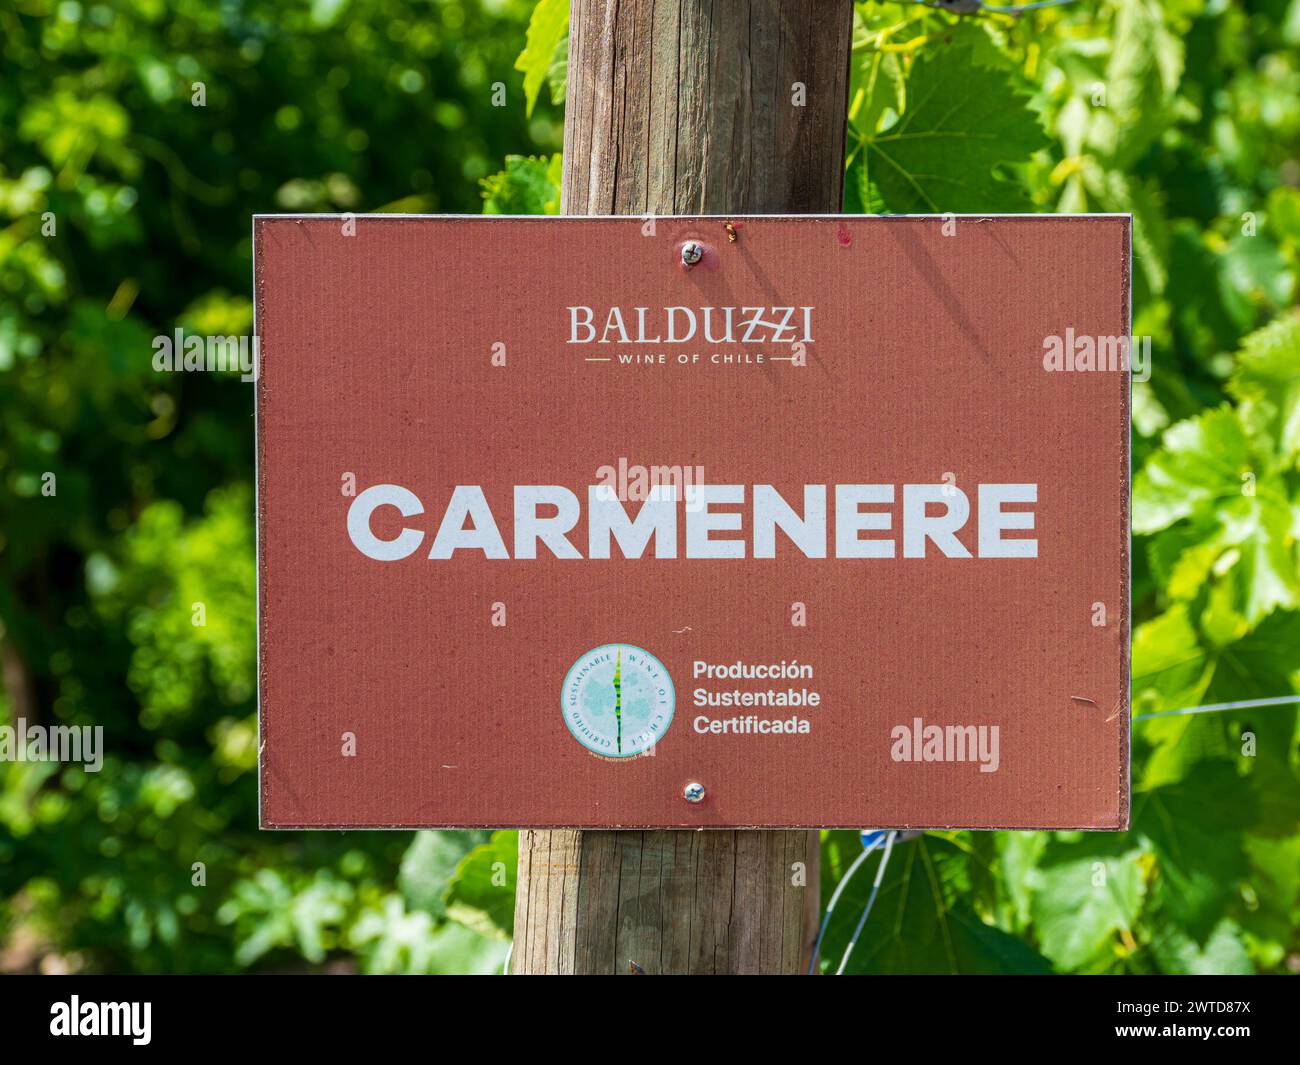 Balduzzi winery , San Javier, Maule valley, small vineyard at the shop with varieties of grapes, Chile Stock Photo